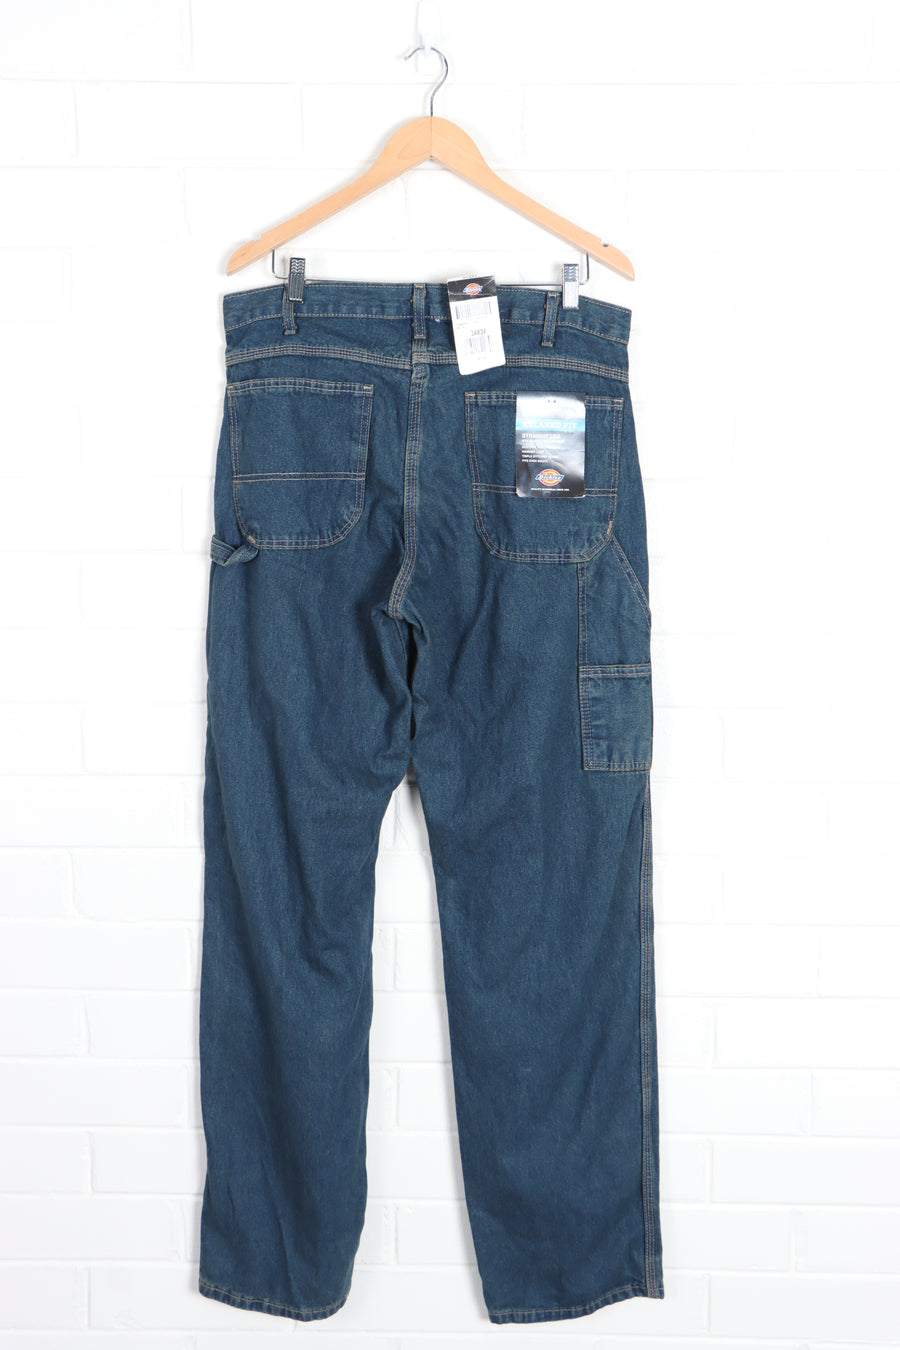 DICKIES Deadstock Relaxed Fit Carpenter Jeans (34 x 34) - Vintage Sole Melbourne